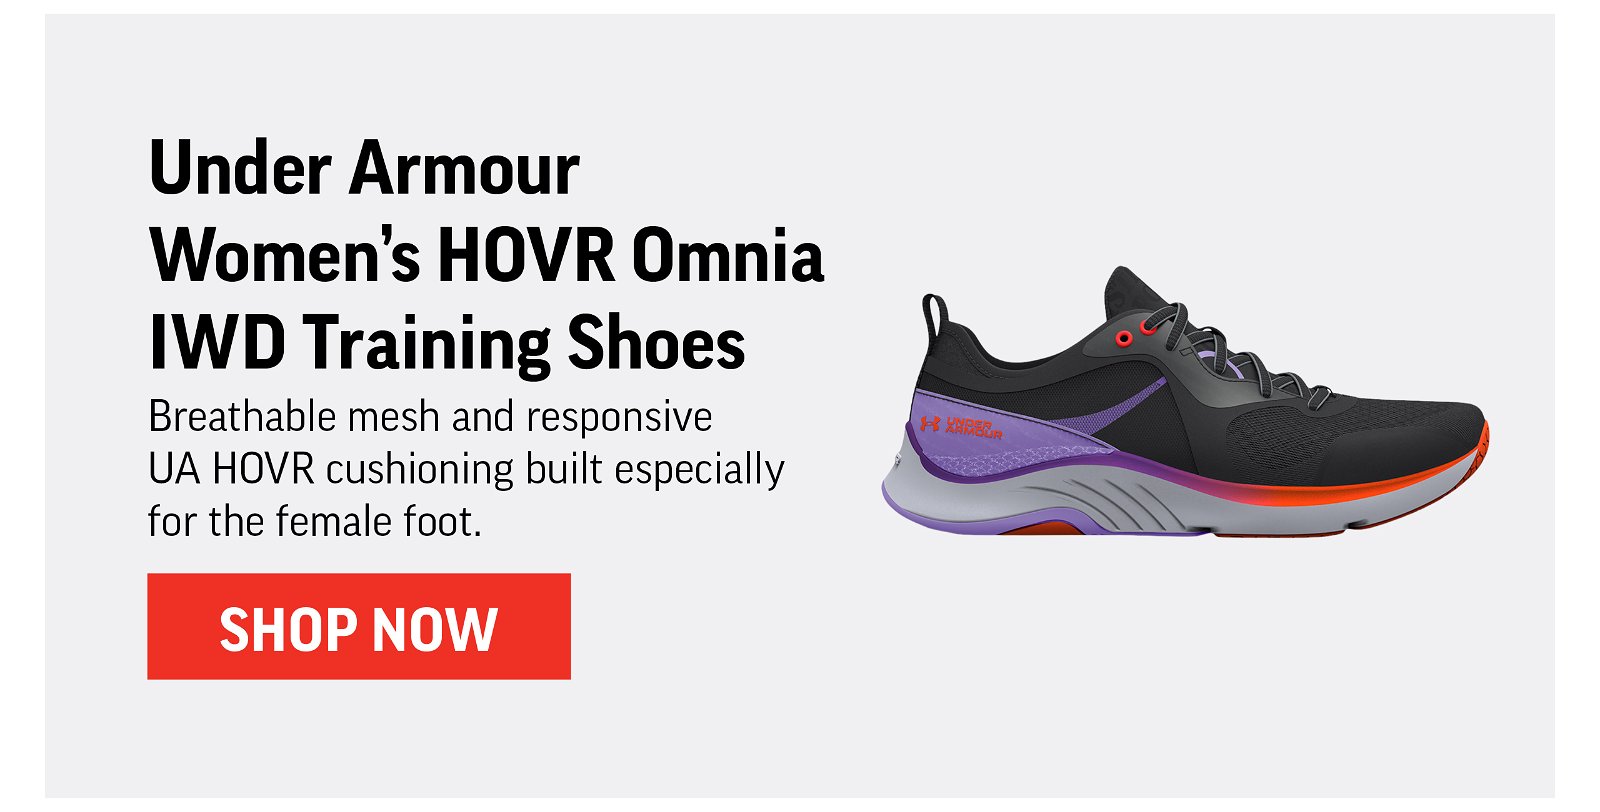 Under Armour Women's Hovr Omnia IWD Training Shoes